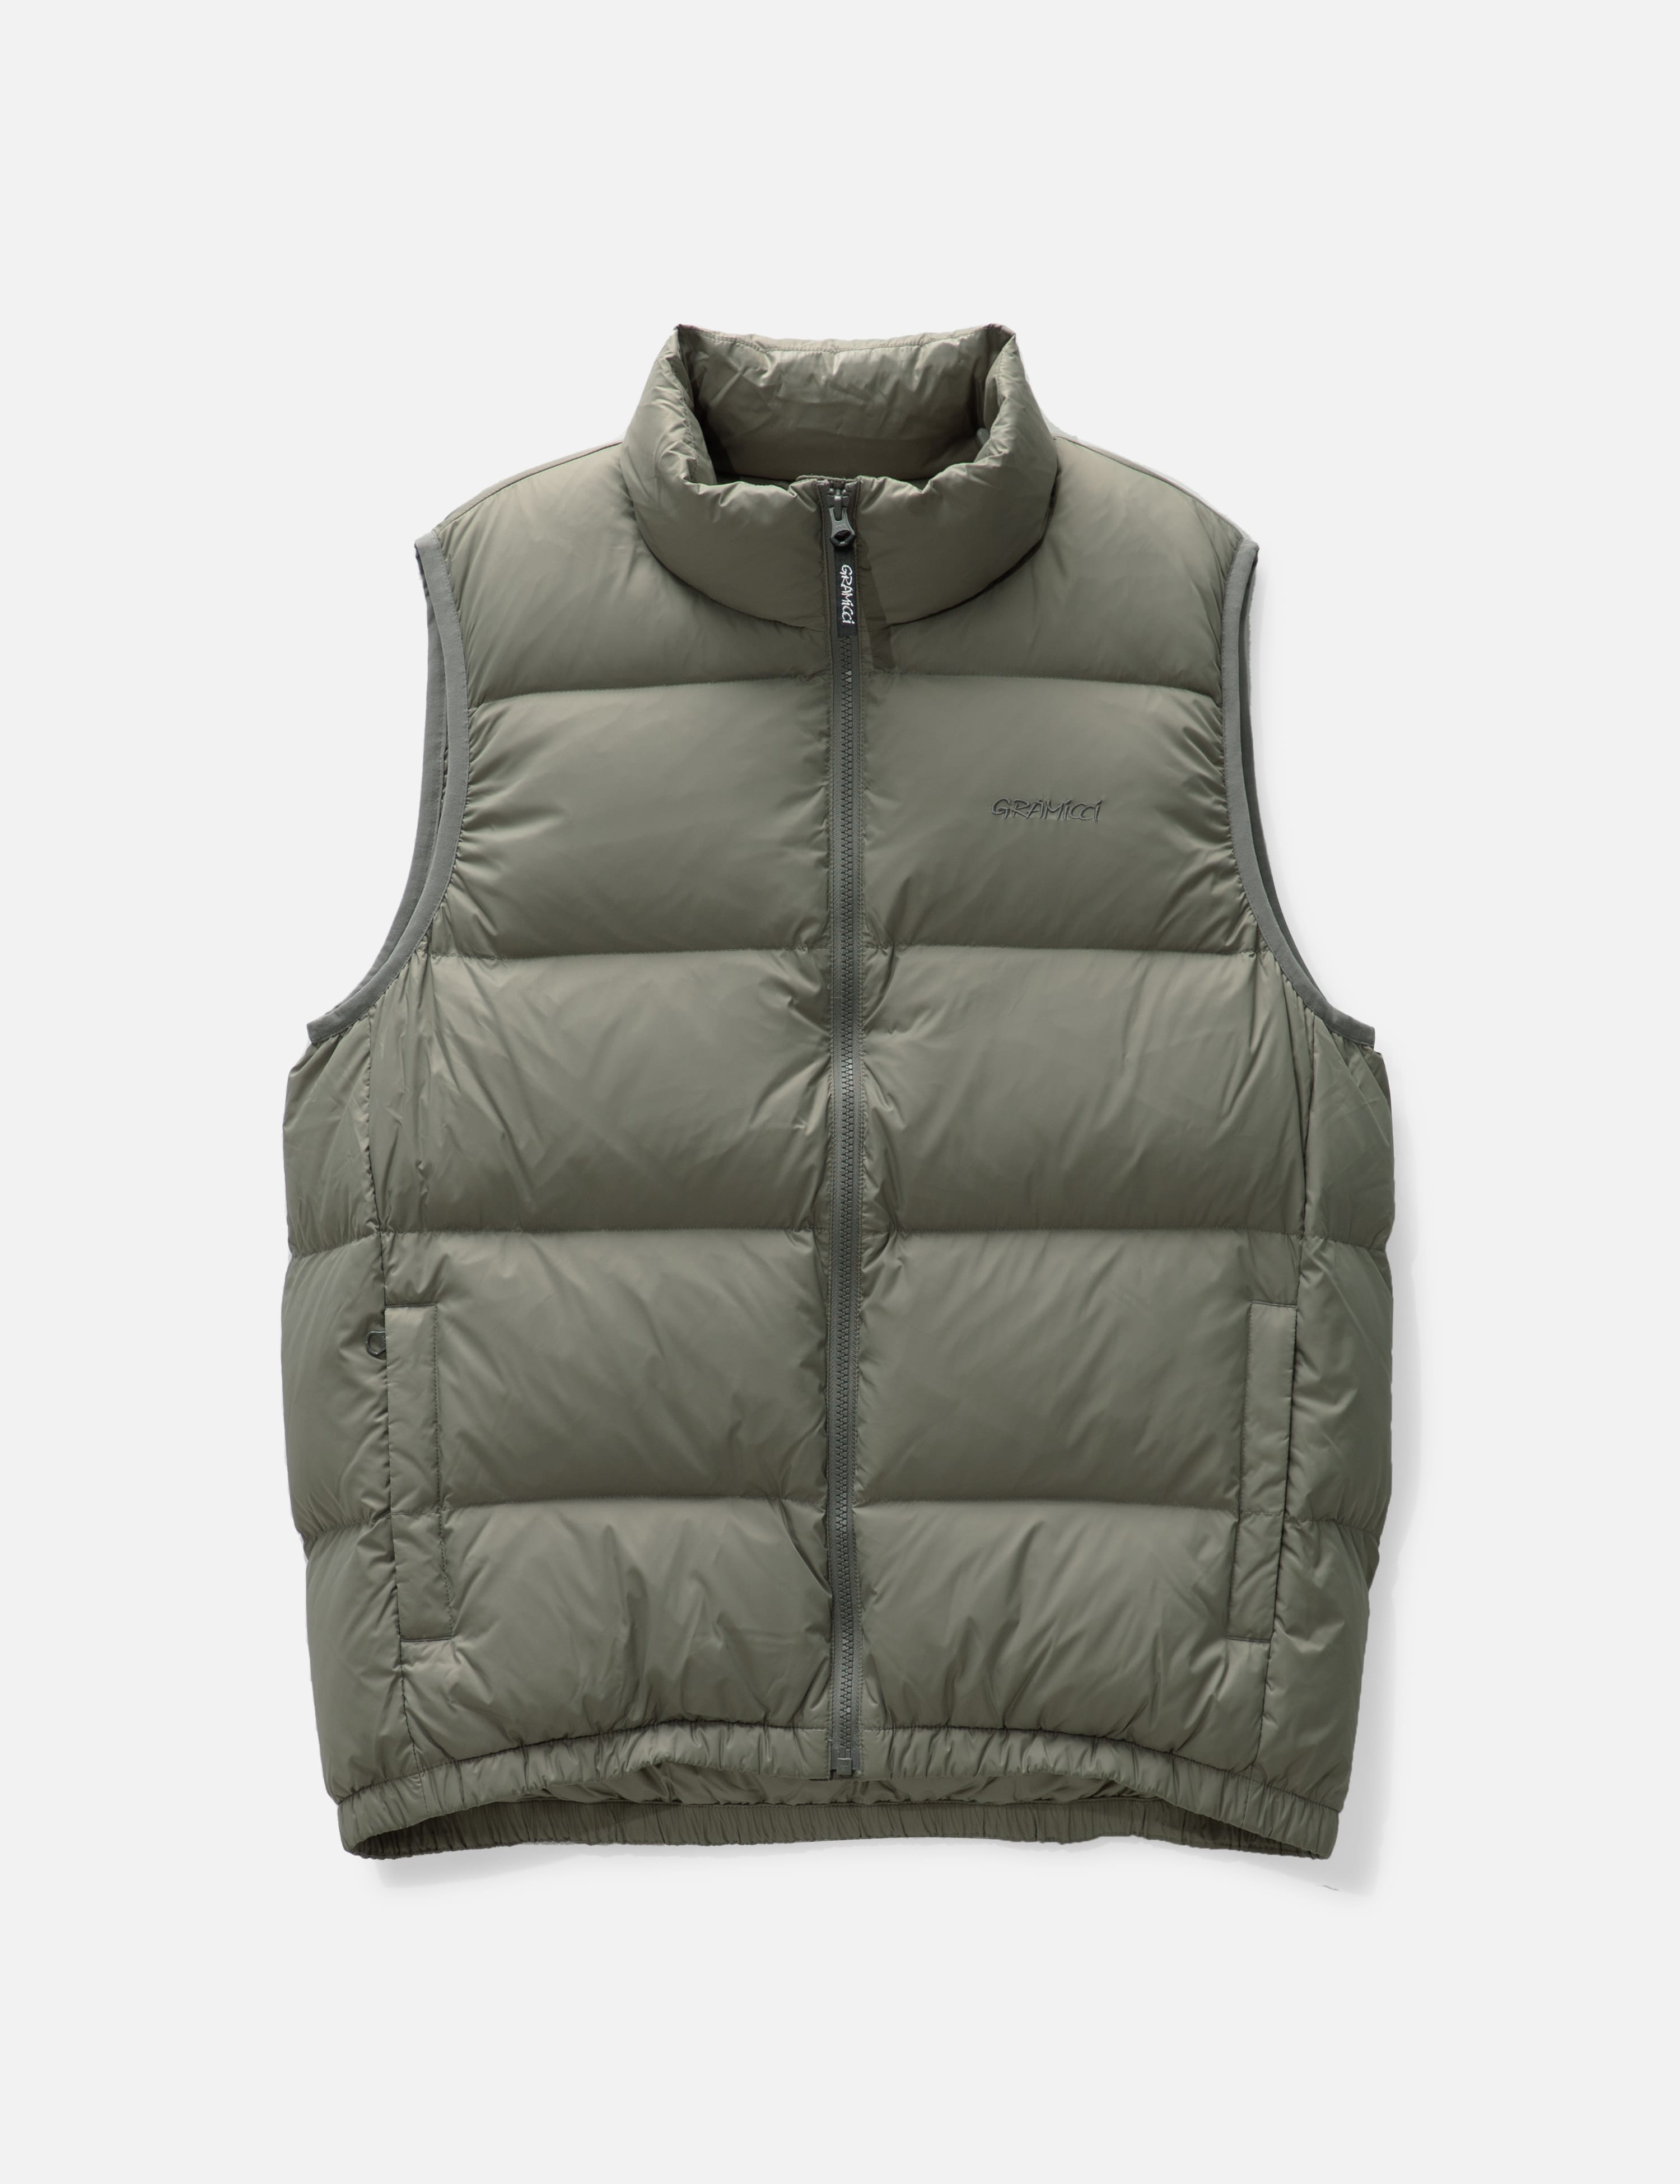 Engineered Garments   COVER VEST   HBX   Globally Curated Fashion